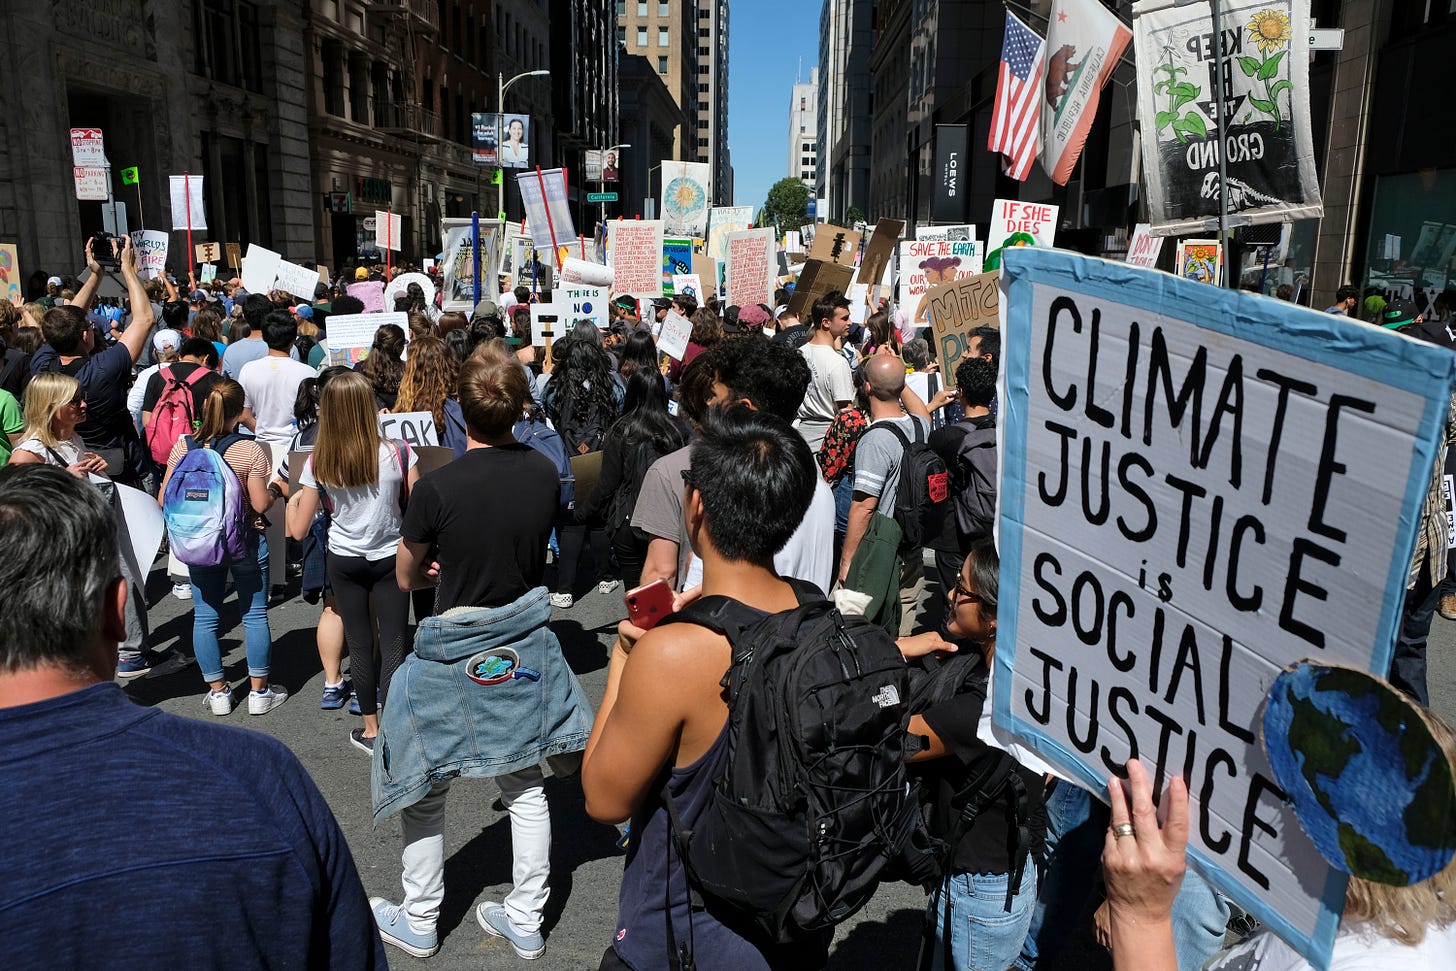 Protestor in crowd holds sign that says 'Climate justice is social justice'